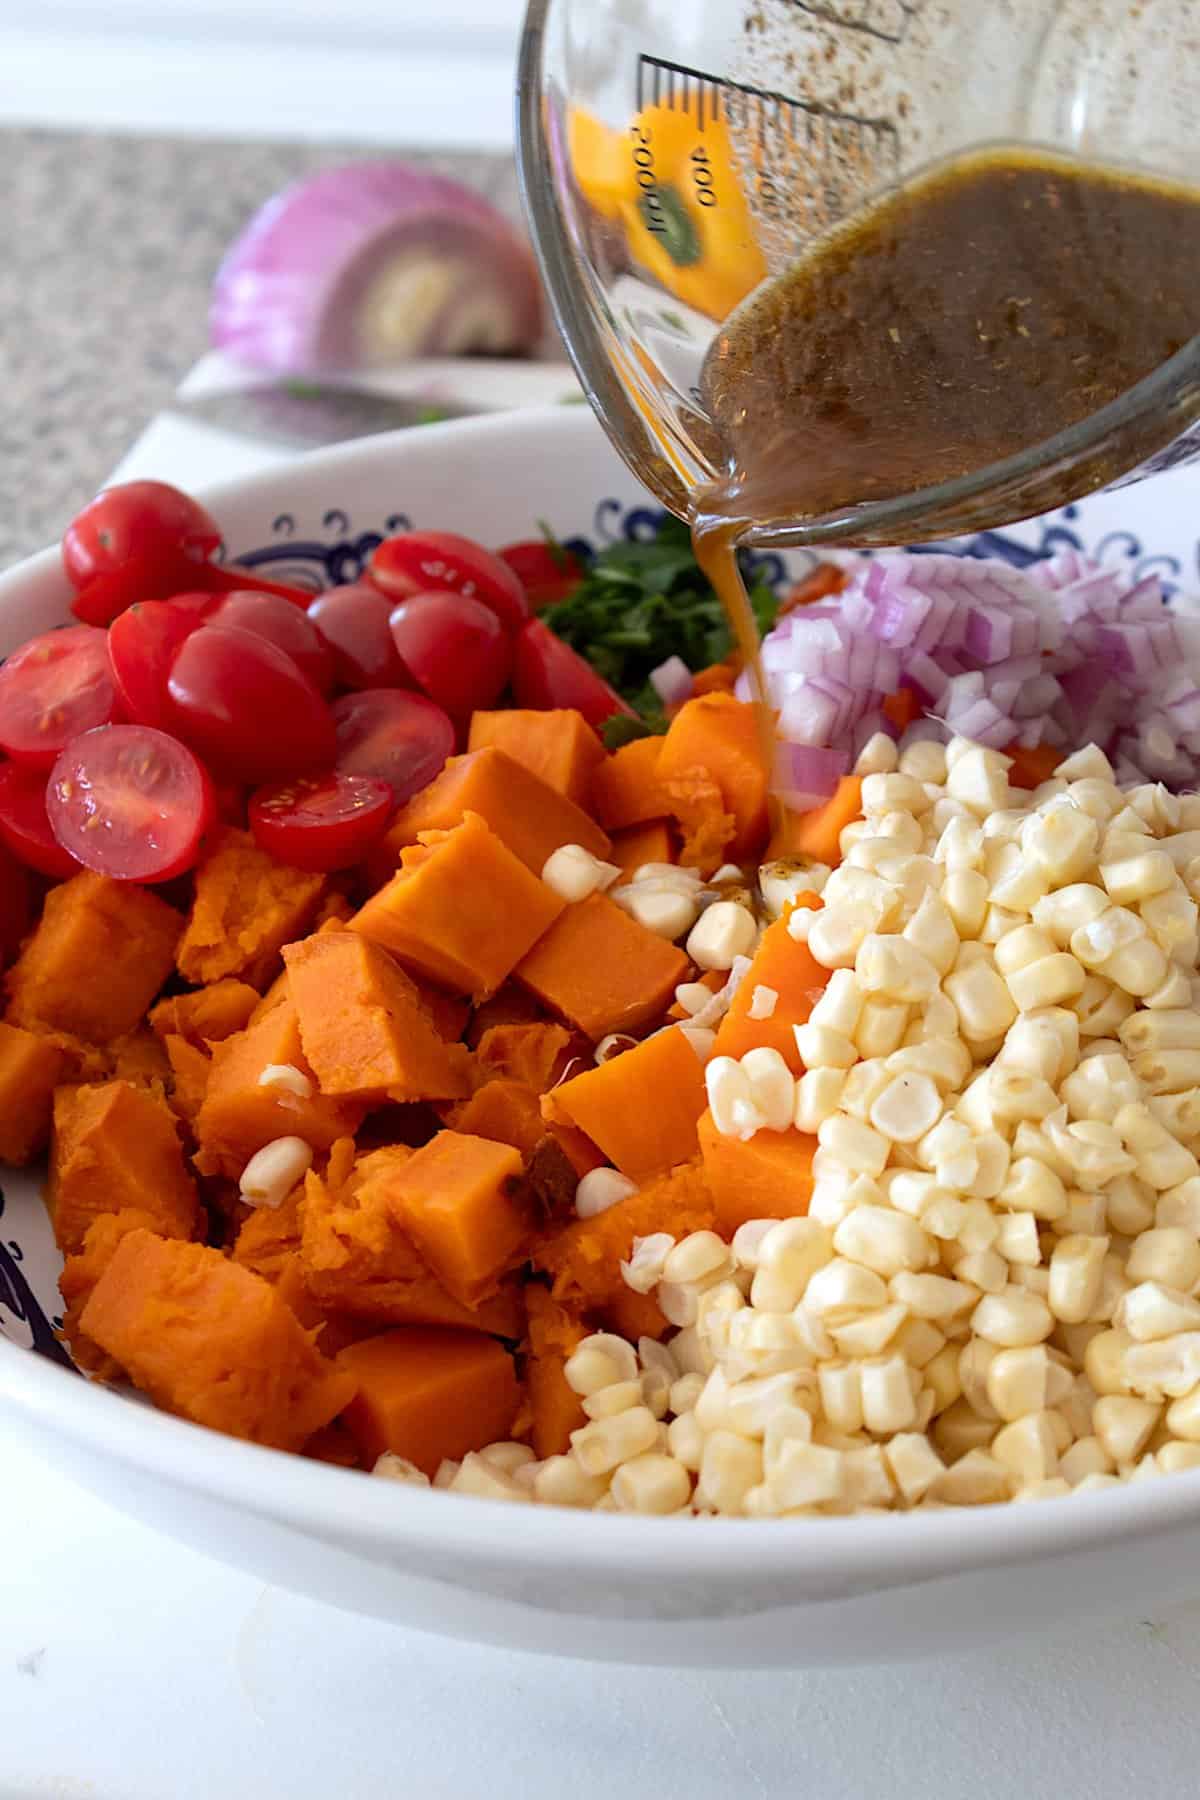 drizzling dressing over sweet potato salad